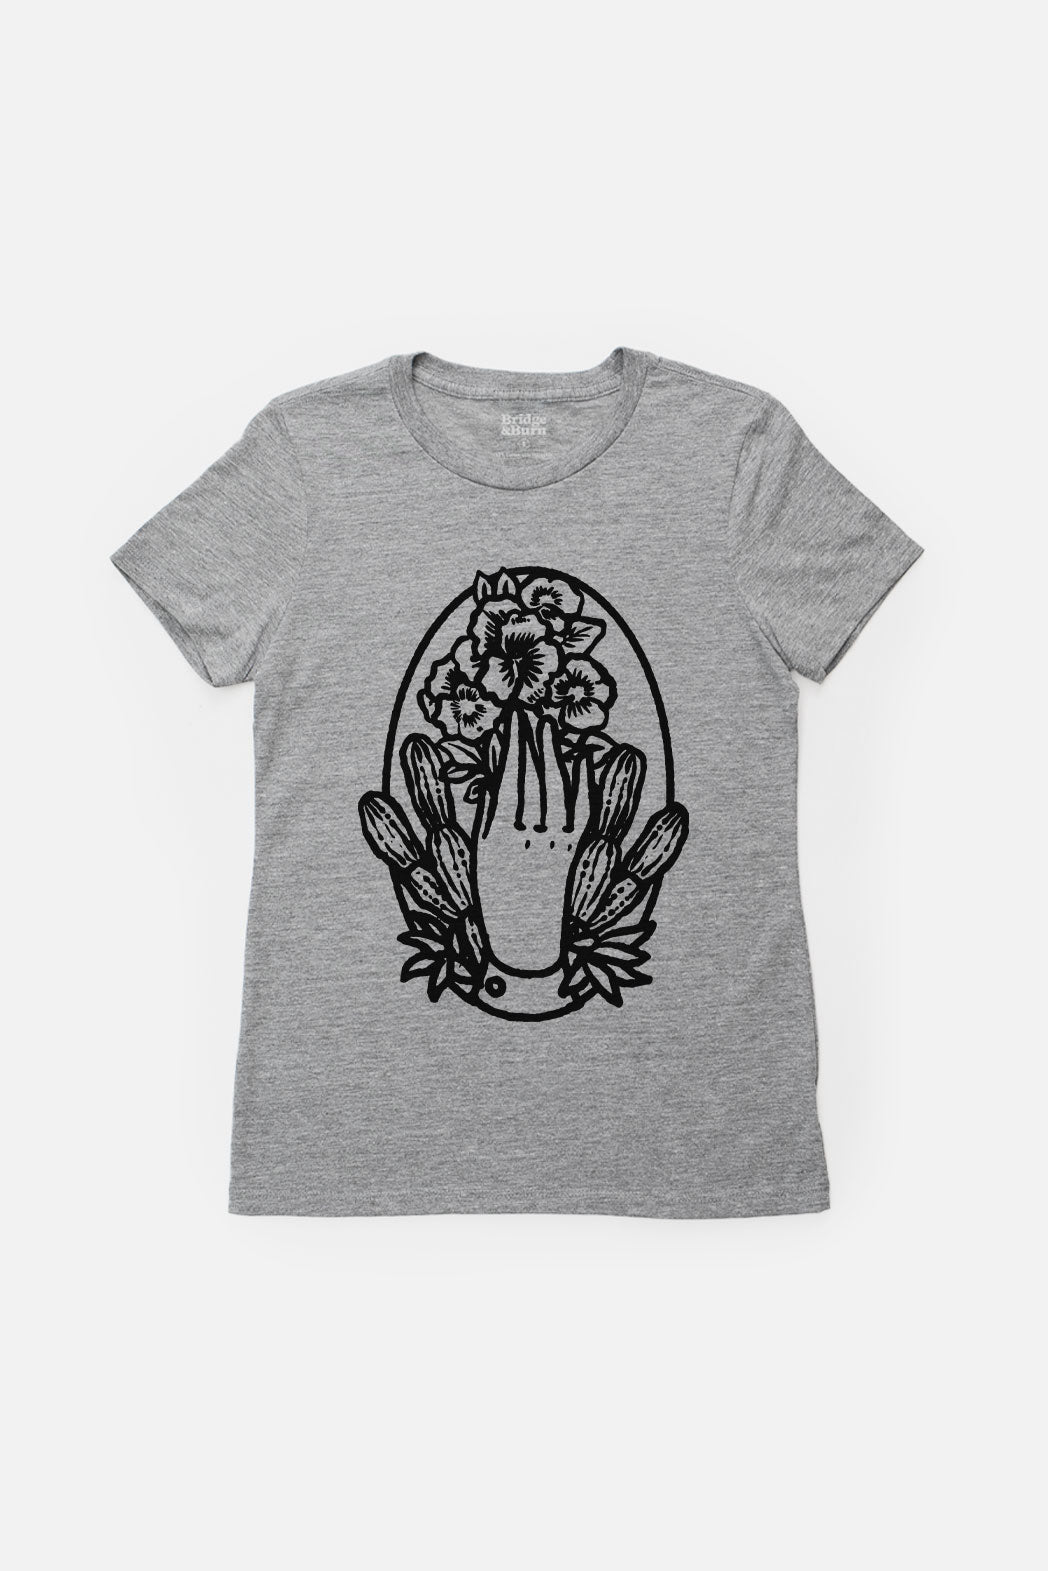 Women's Delicate Touch Grey